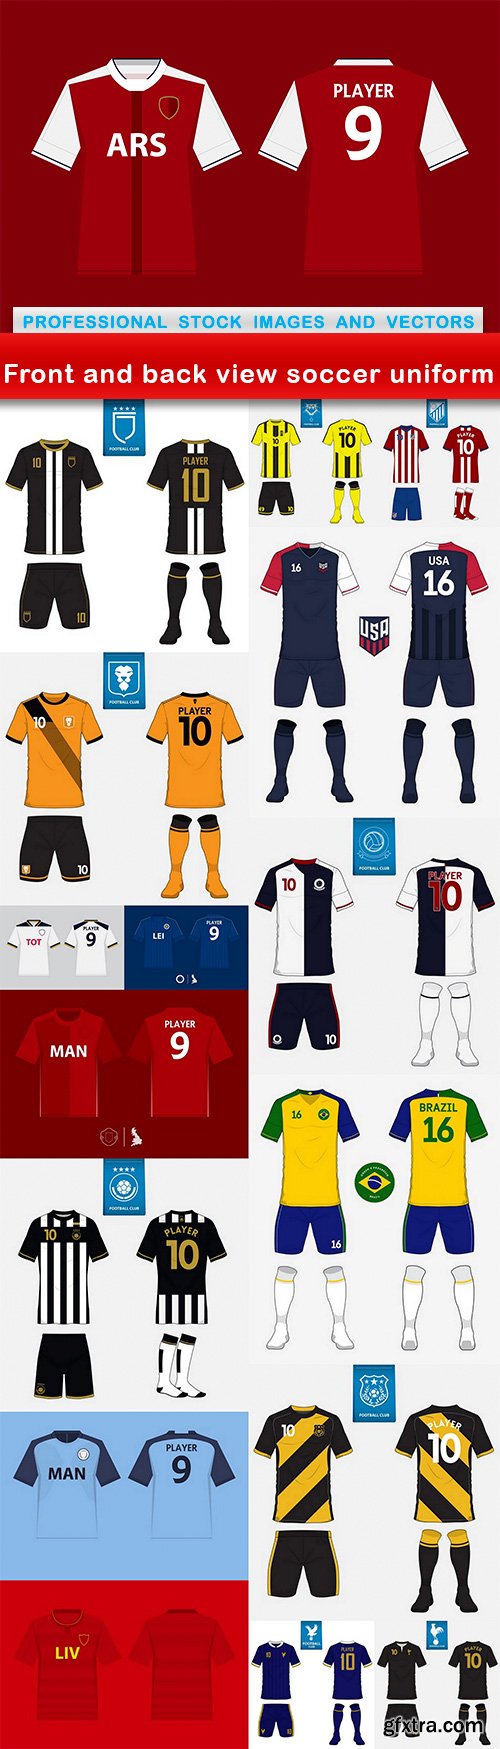 Front and back view soccer uniform - 17 EPS